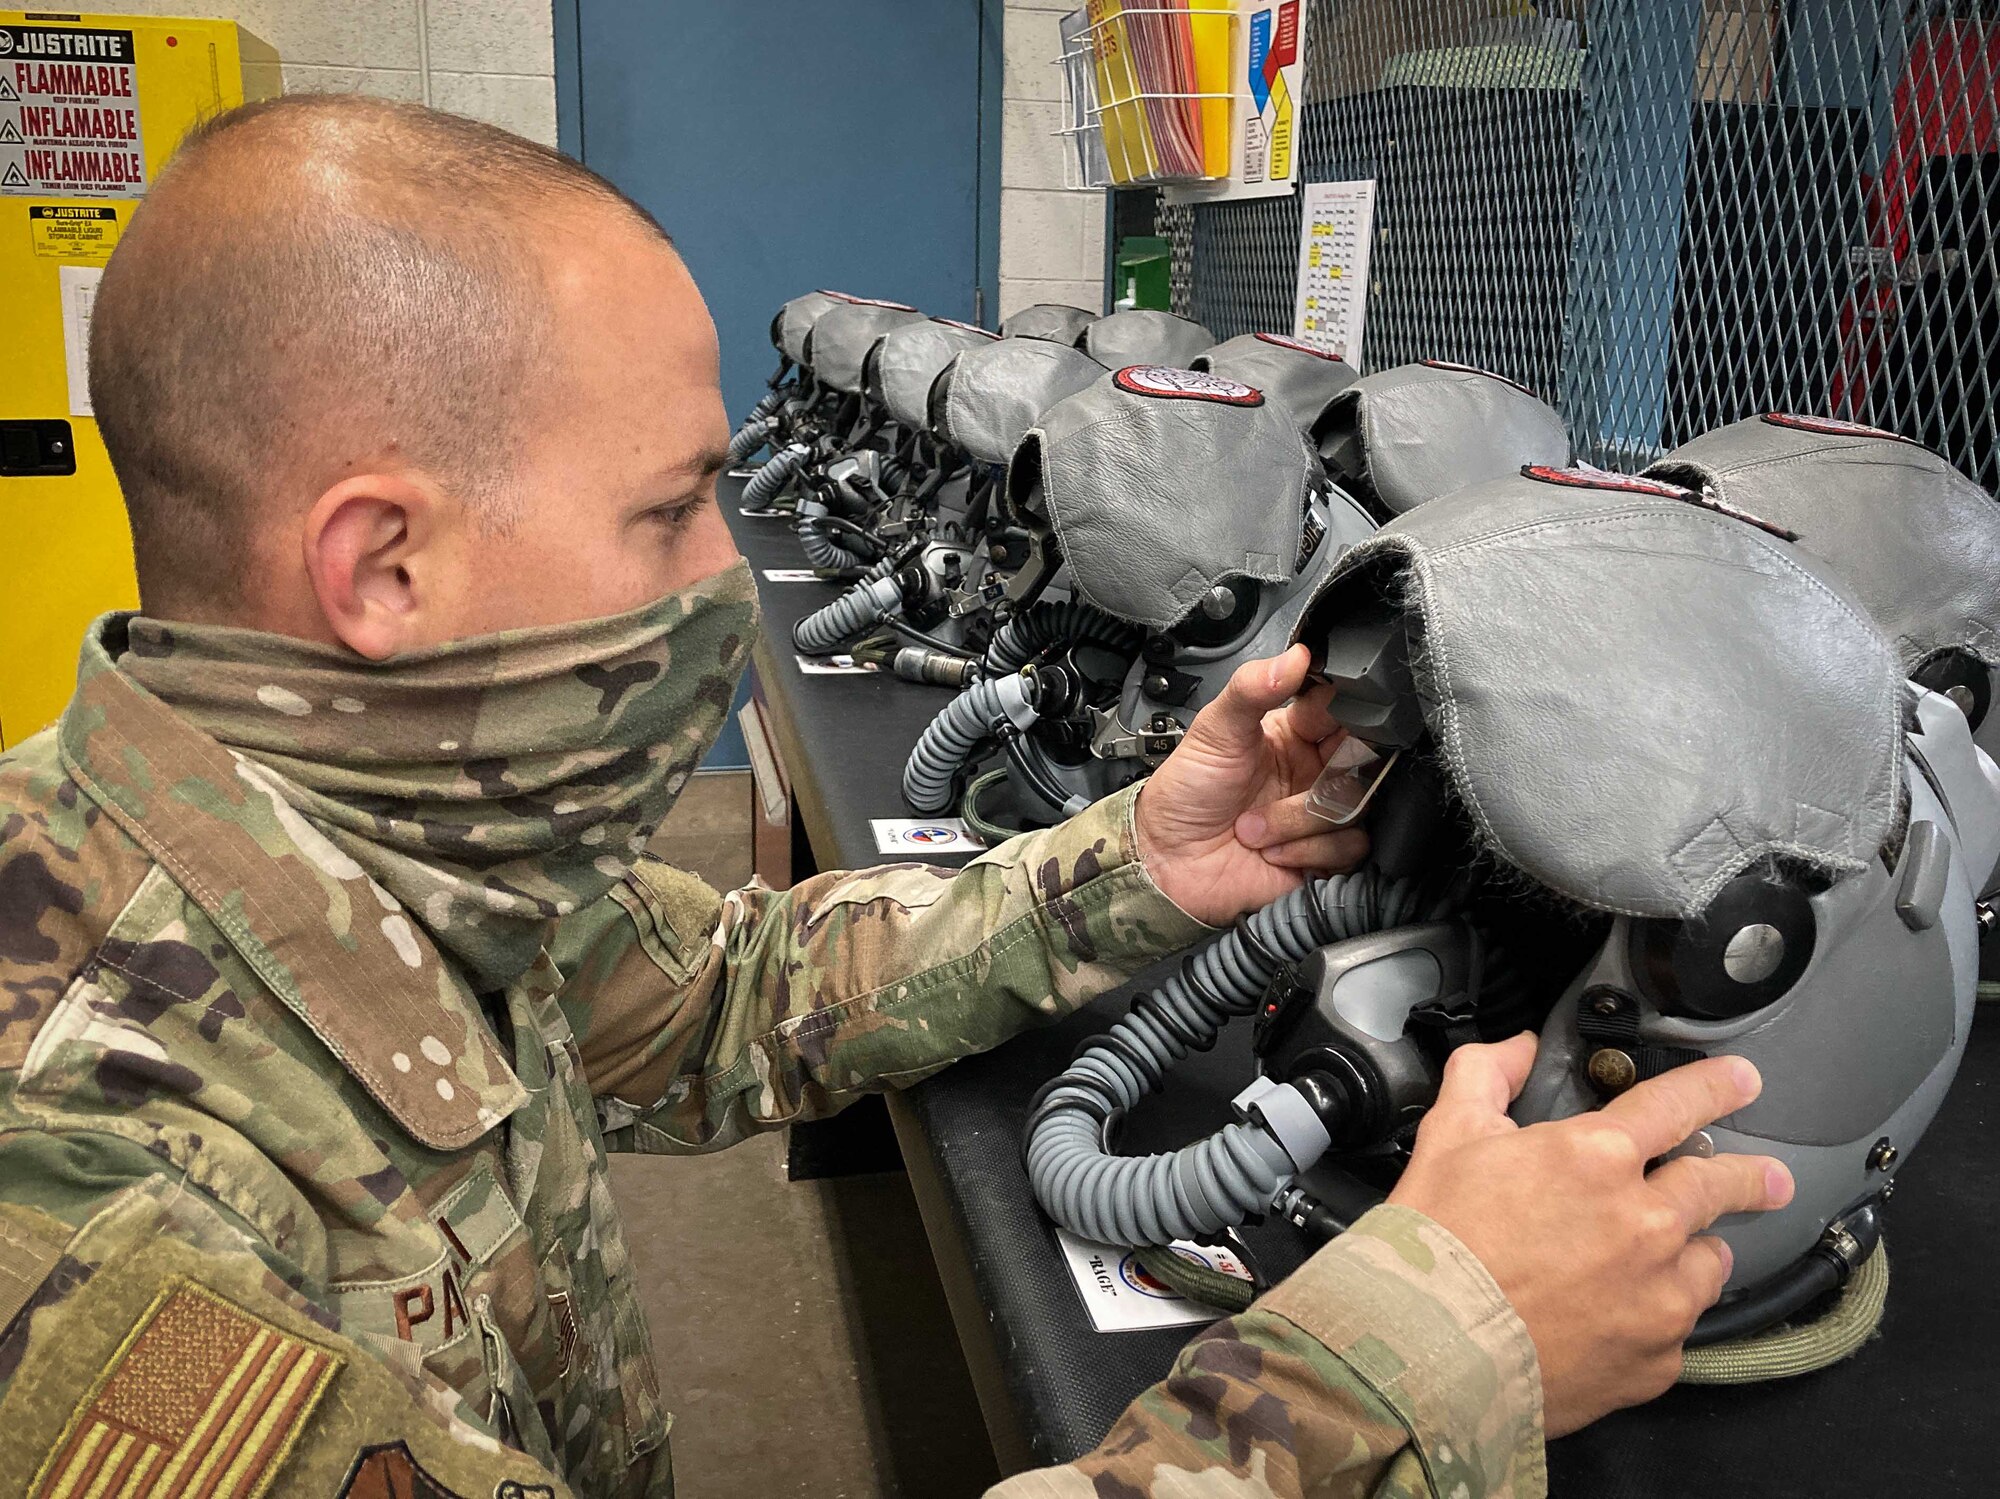 Master Sgt. Rudolph Panacci, 301st Fighter Wing aircrew flight equipment technician, performs a pre-flight visual inspection of the PD-14 display module for the Hybrid Optical based Inertial Tracking system (HObIT) at U.S. Naval Air Station Joint Reserve Base Fort Worth, Texas on August 5, 2020. The 301 FW AFE section's mission is to provide aircrew members with safe and effective flight equipment to increase performance and enhance mission success. (Courtesy photo)